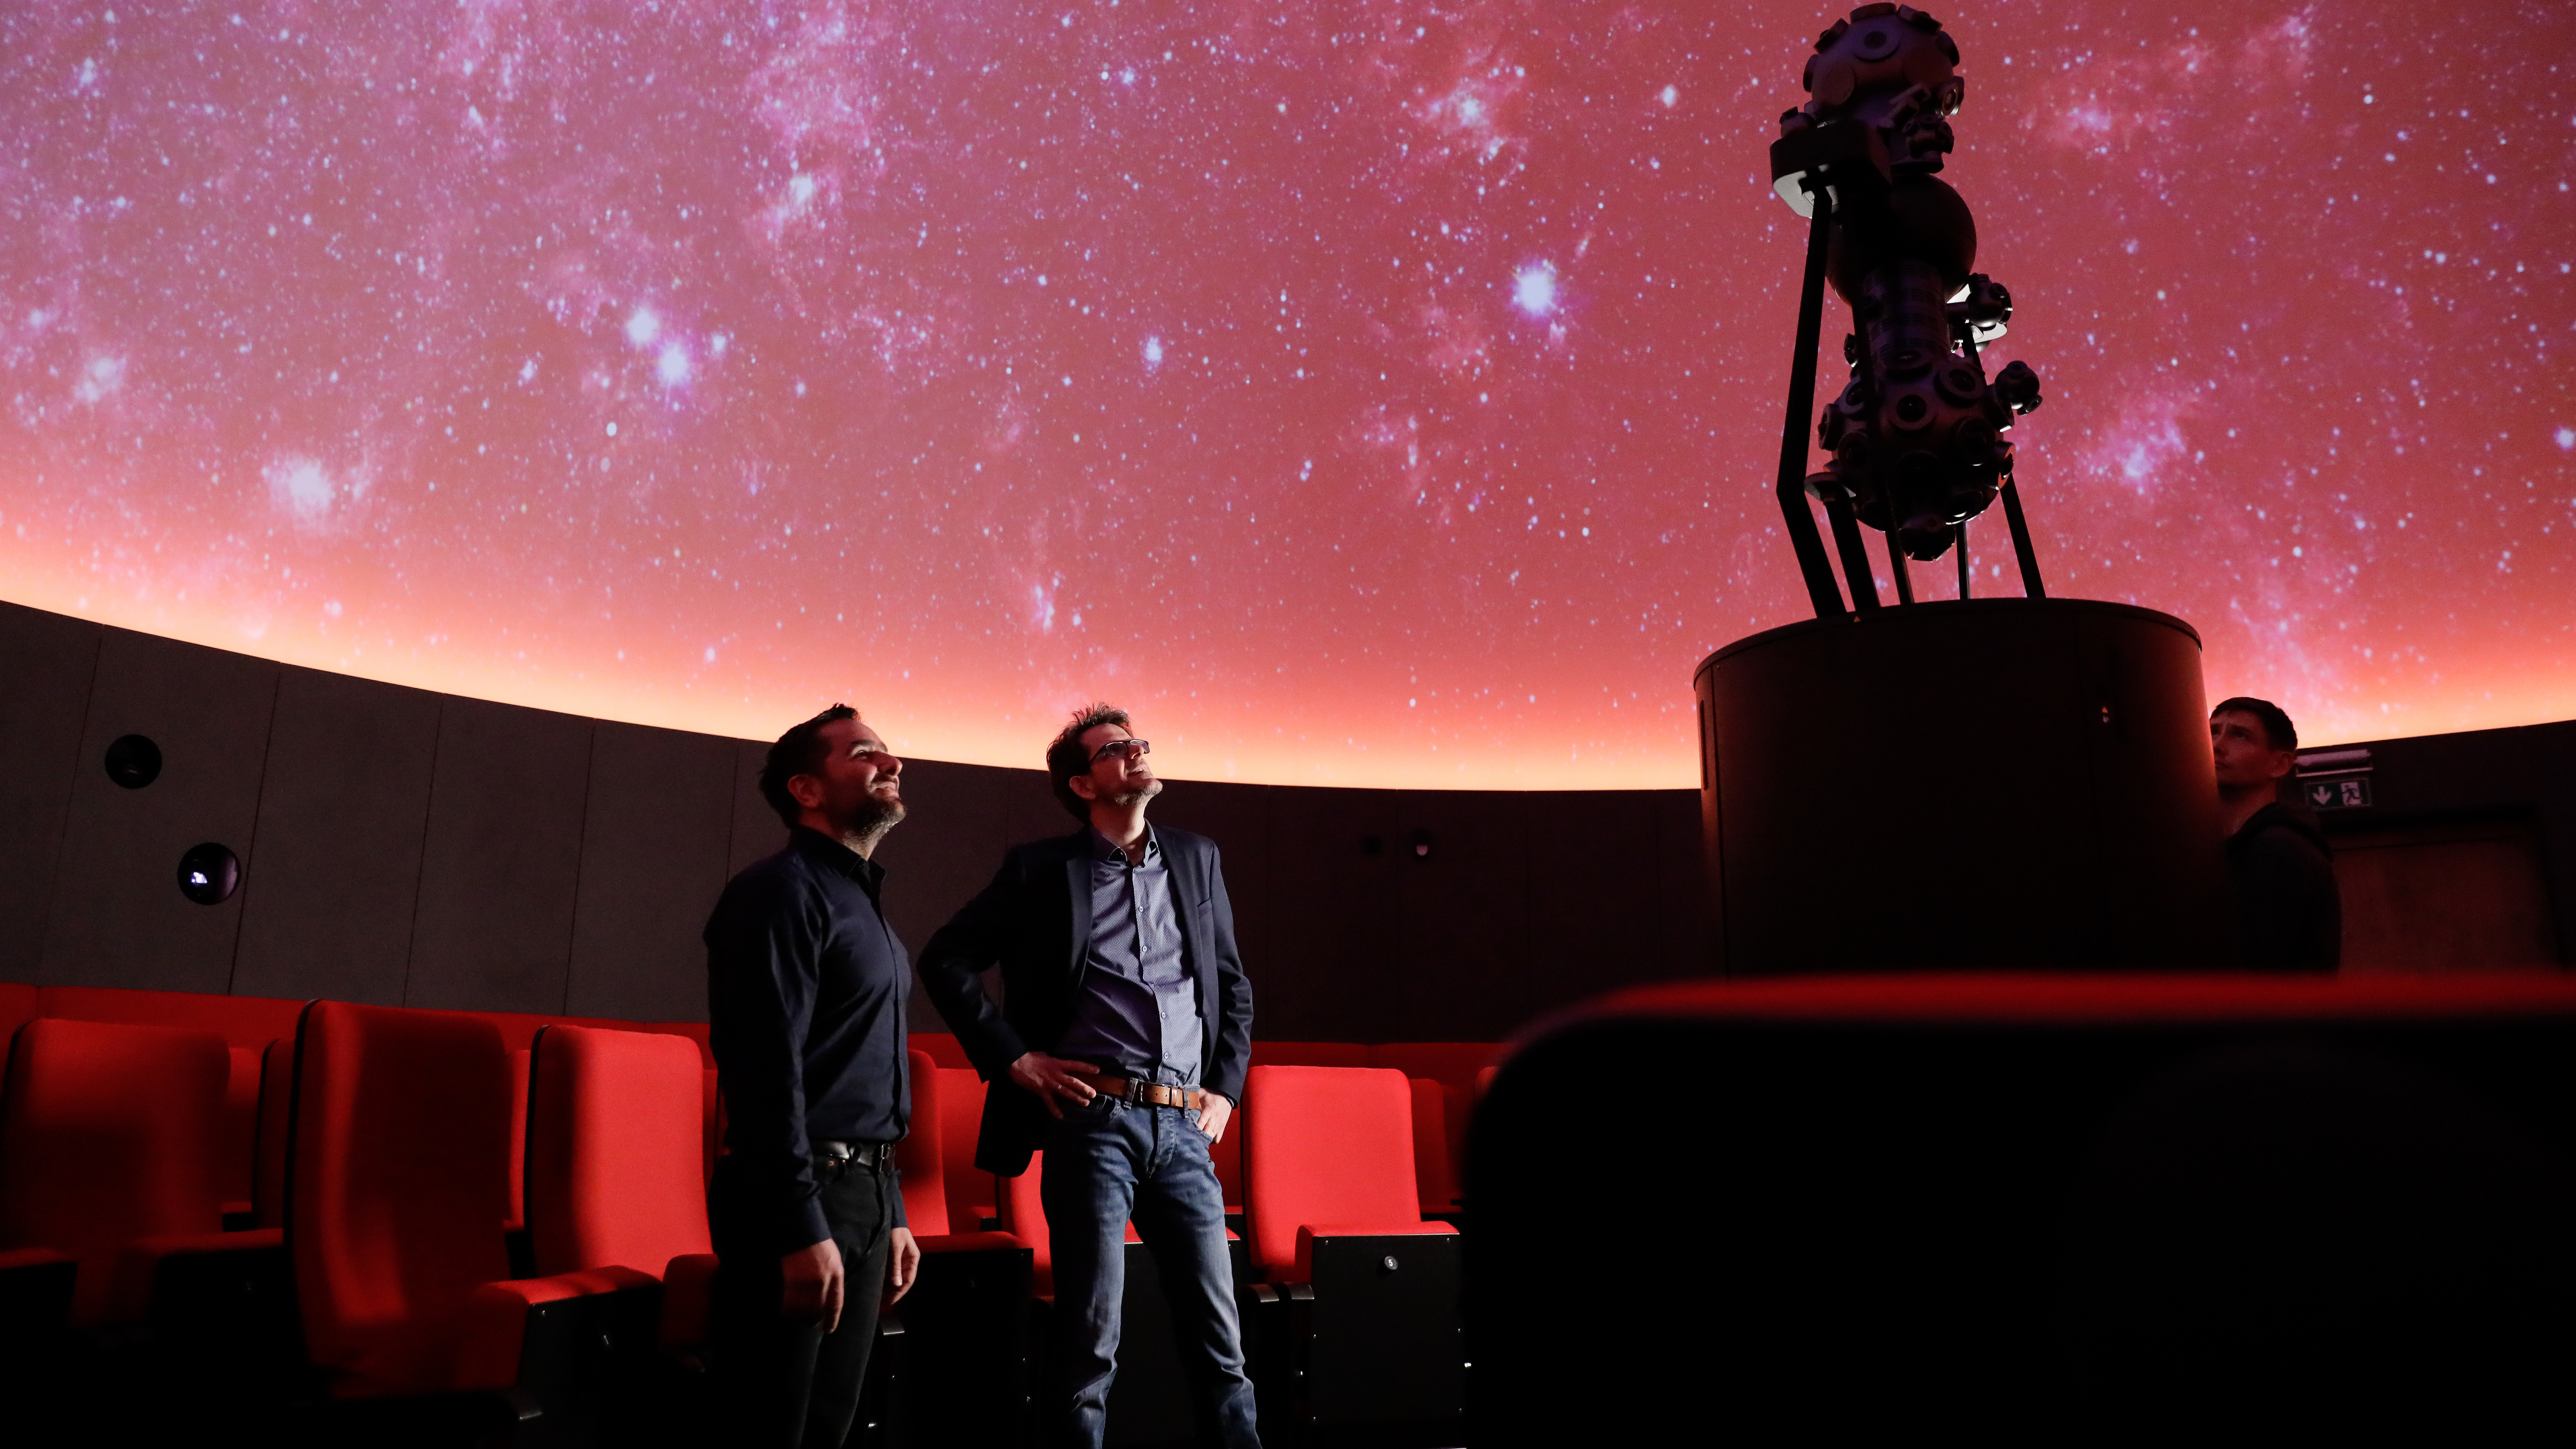 Planetarium in Halle (Saale) inaugurated with ZEISS technology